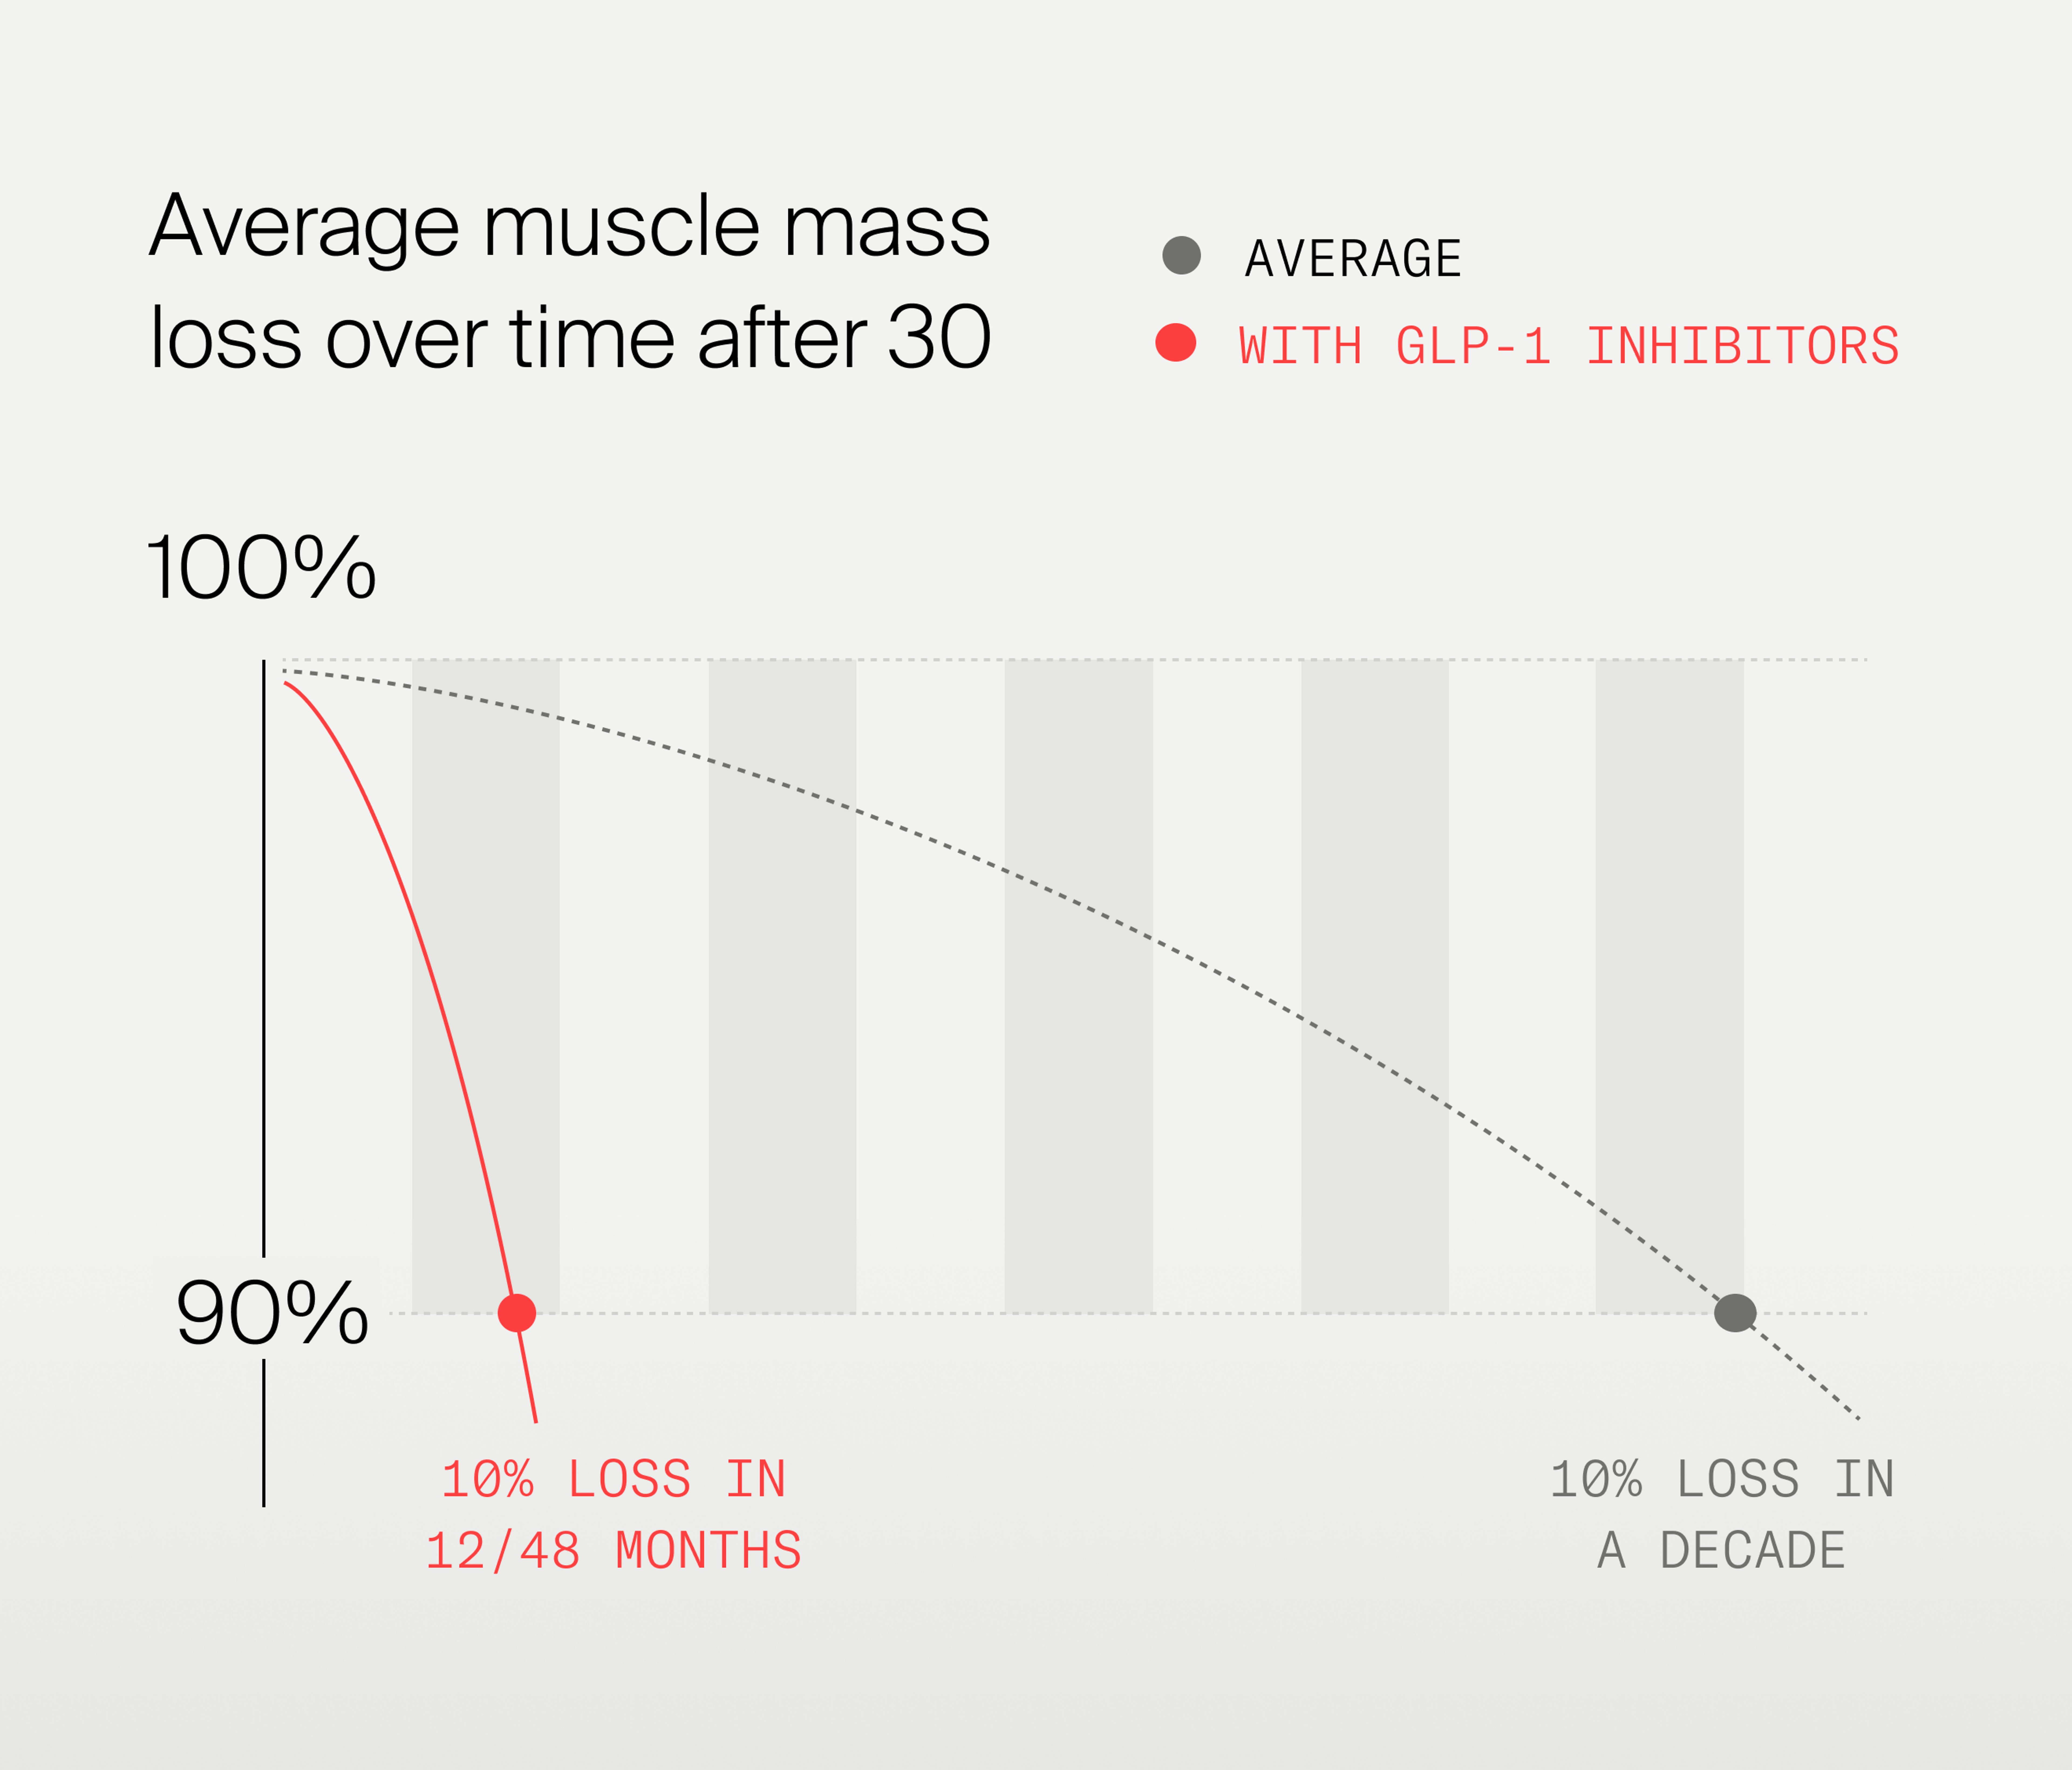 Muscle mass loss over time in GLP-1 Inhibitor users like Ozempic.